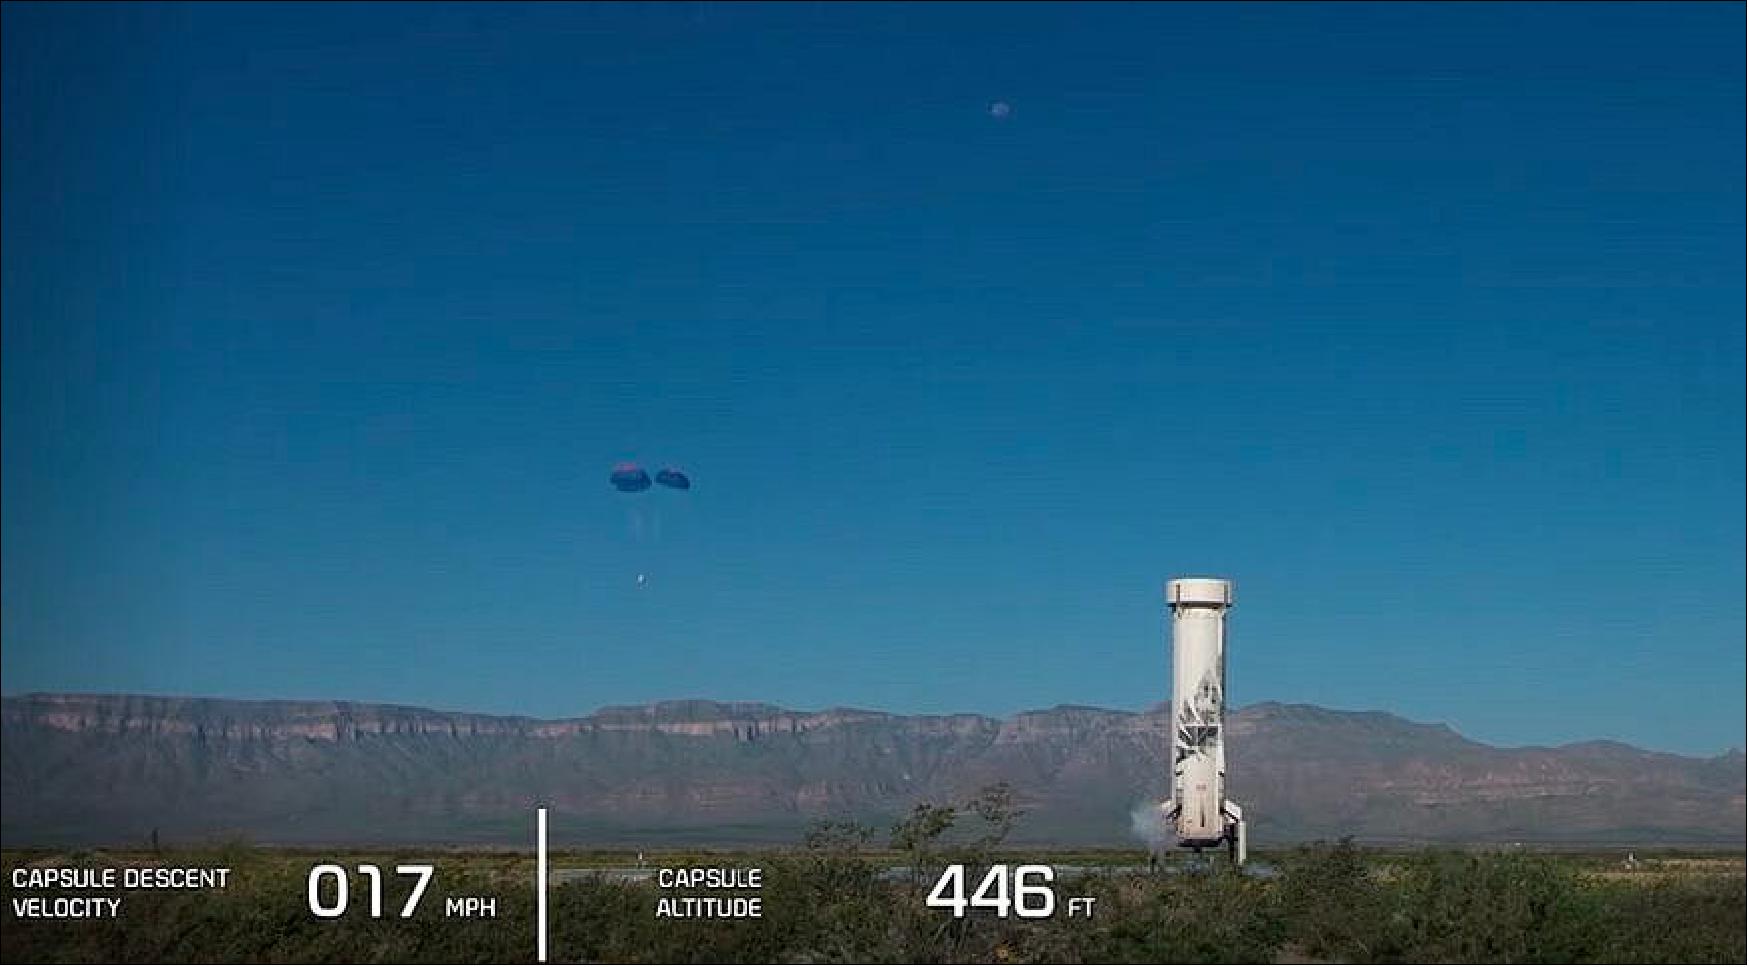 Figure 11: The New Shepard crew capsule descends under parachutes shortly after its booster landed during the NS-17 mission Aug. 25 in West Texas (image credit: Blue Origin webcast)